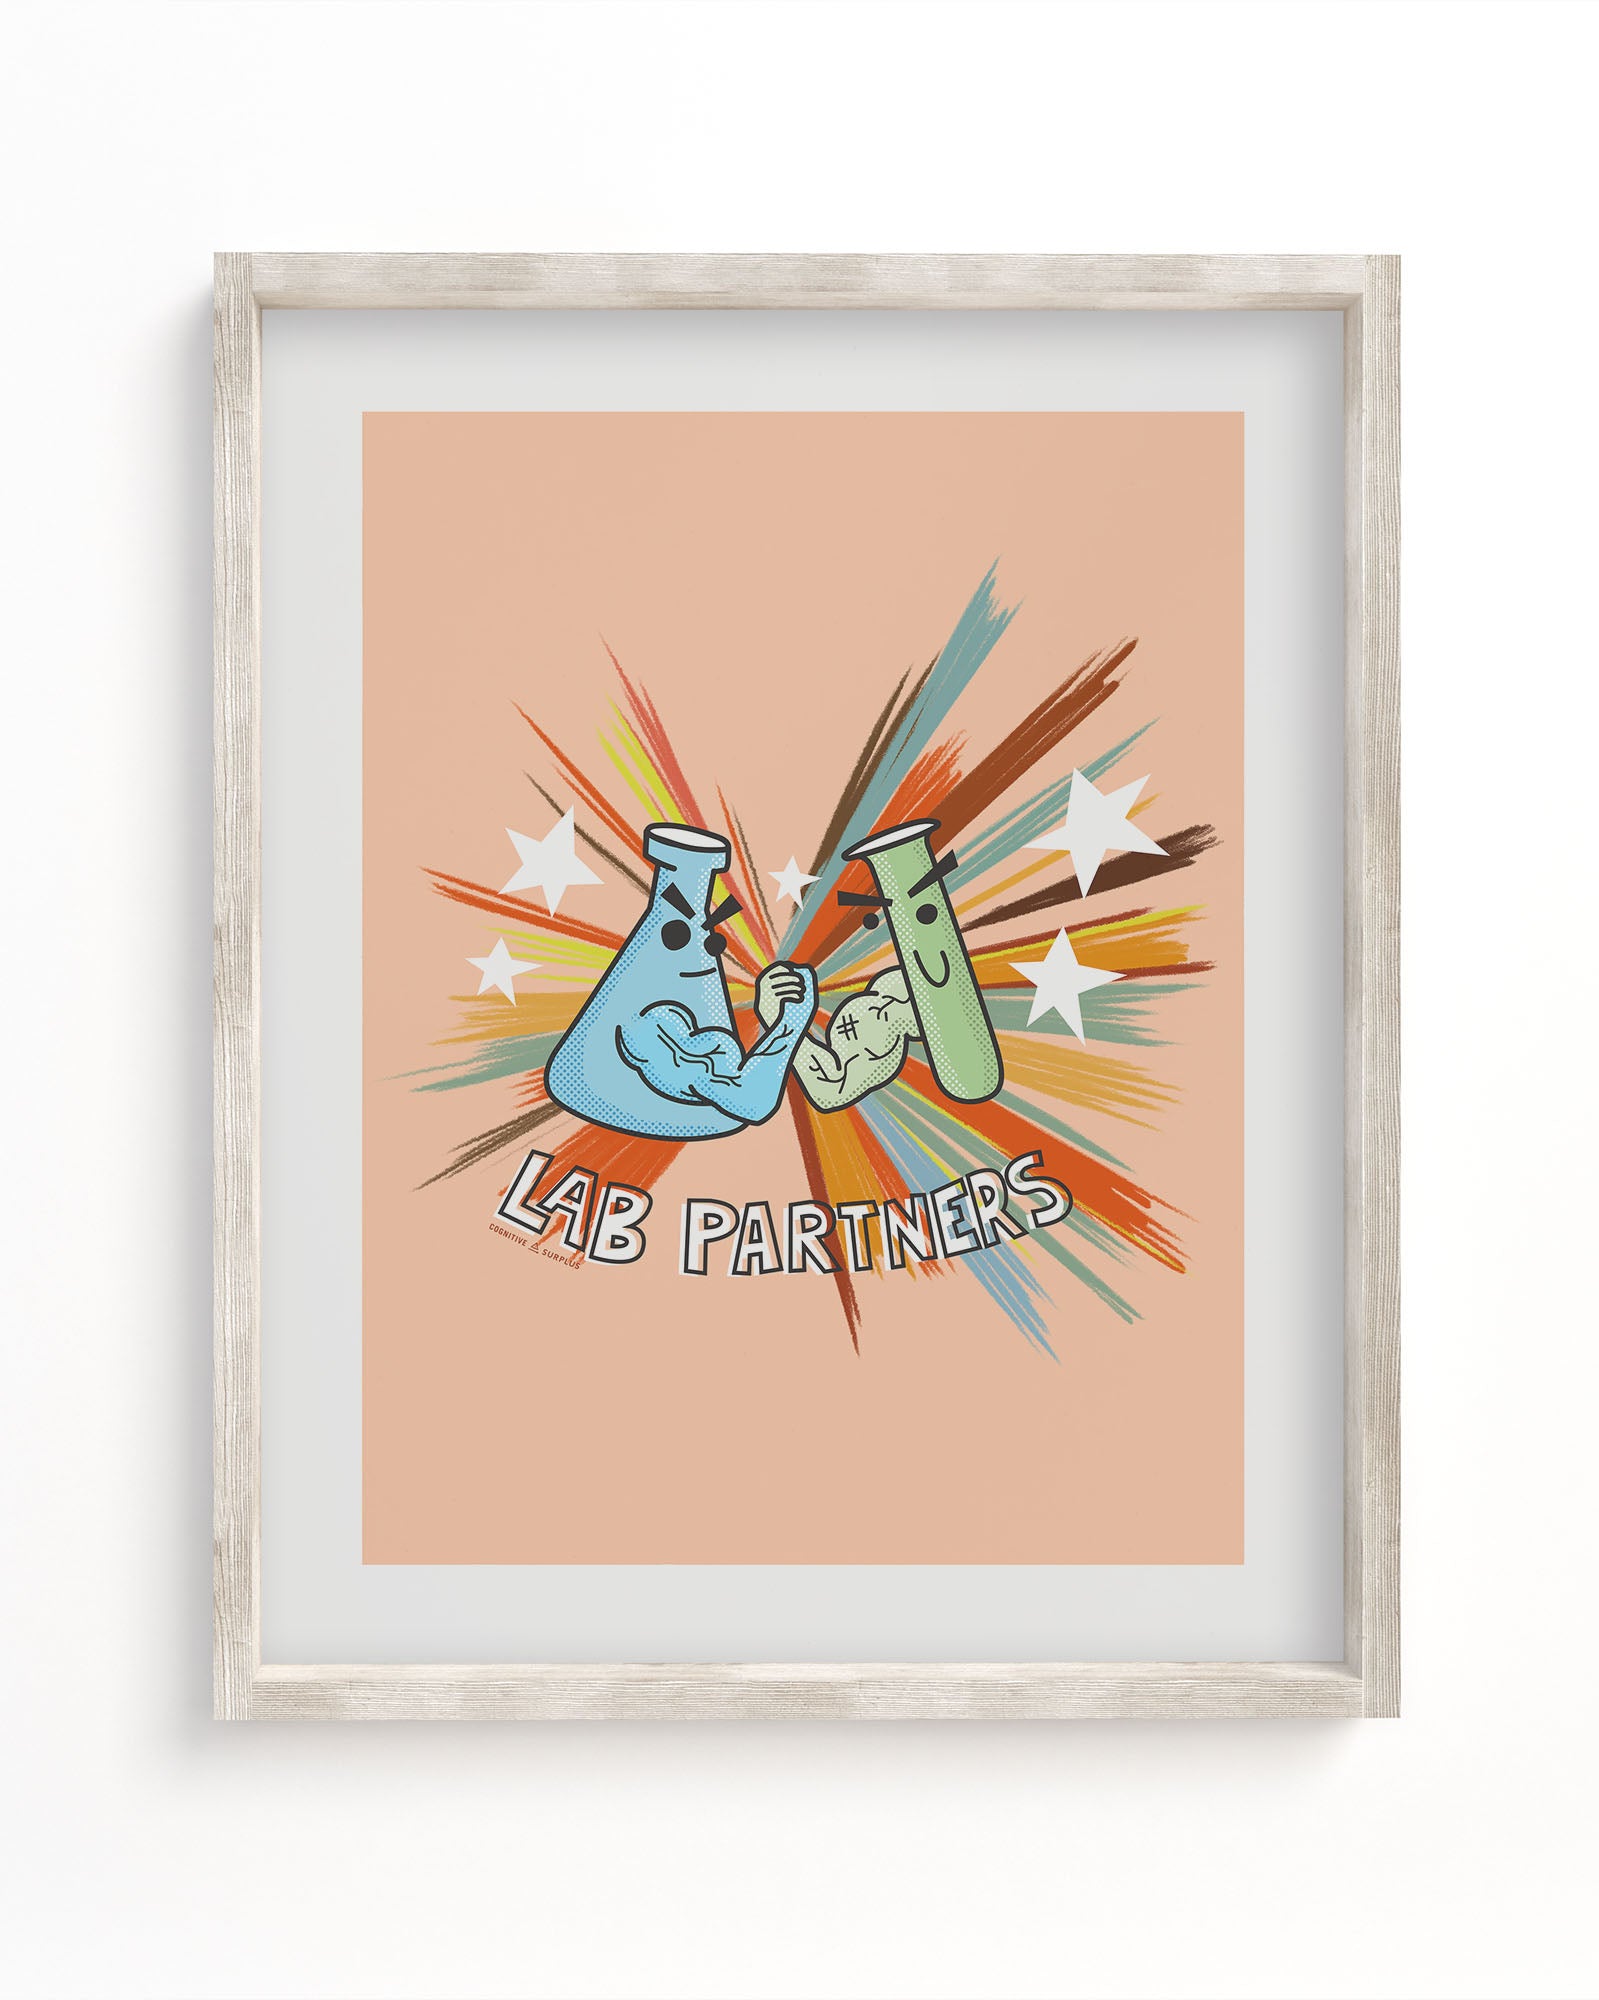 A framed art print of a pair of chemistry beakers called the Lab Partners Museum Print by Cognitive Surplus.